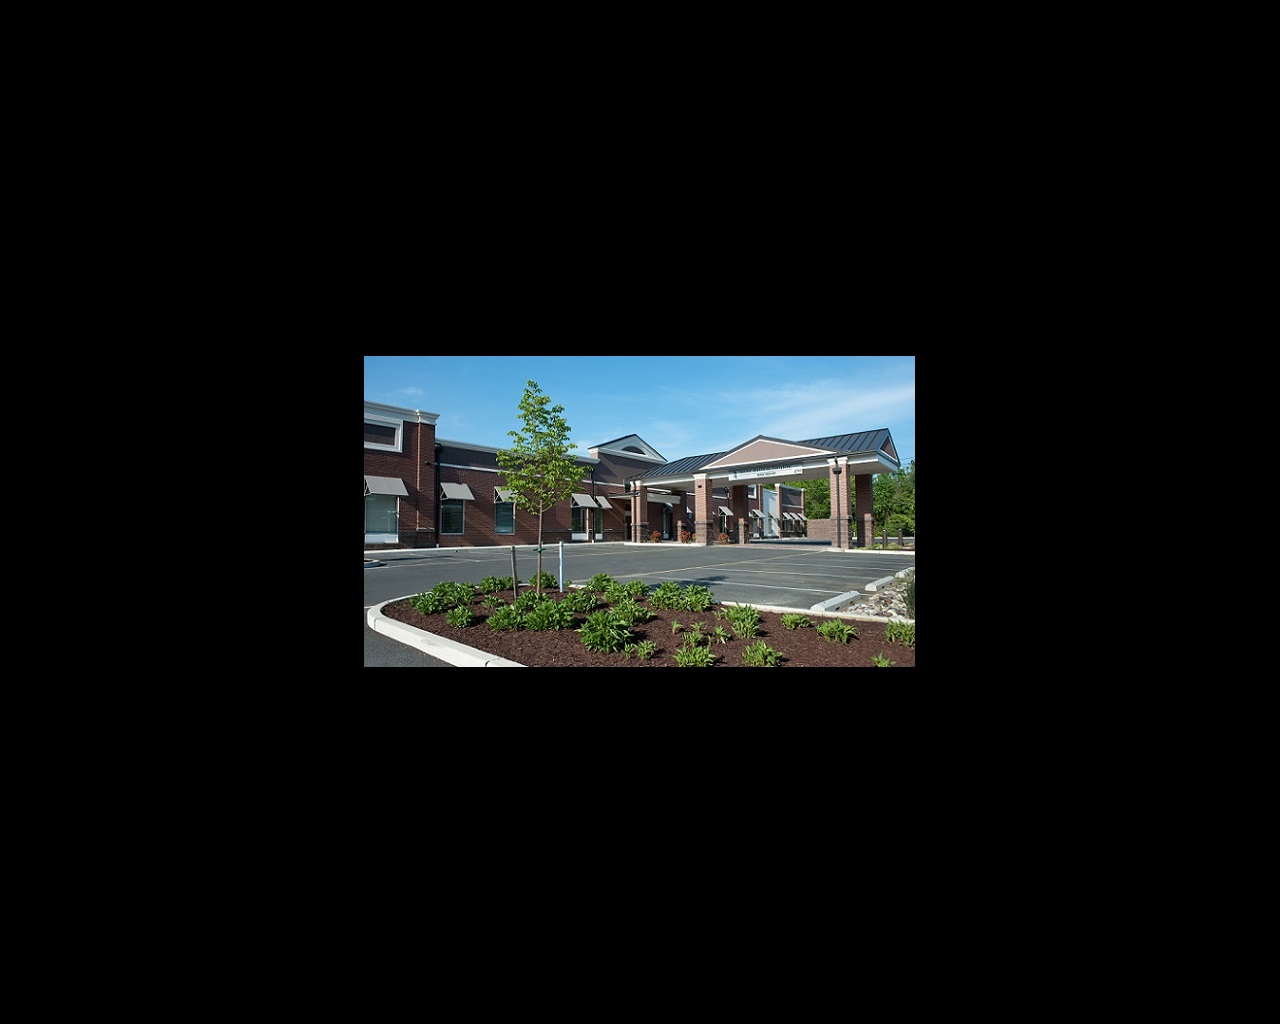 UM Shore Medical Pavilion at Easton is shown, amidst a blue sky and fresh landscaping.